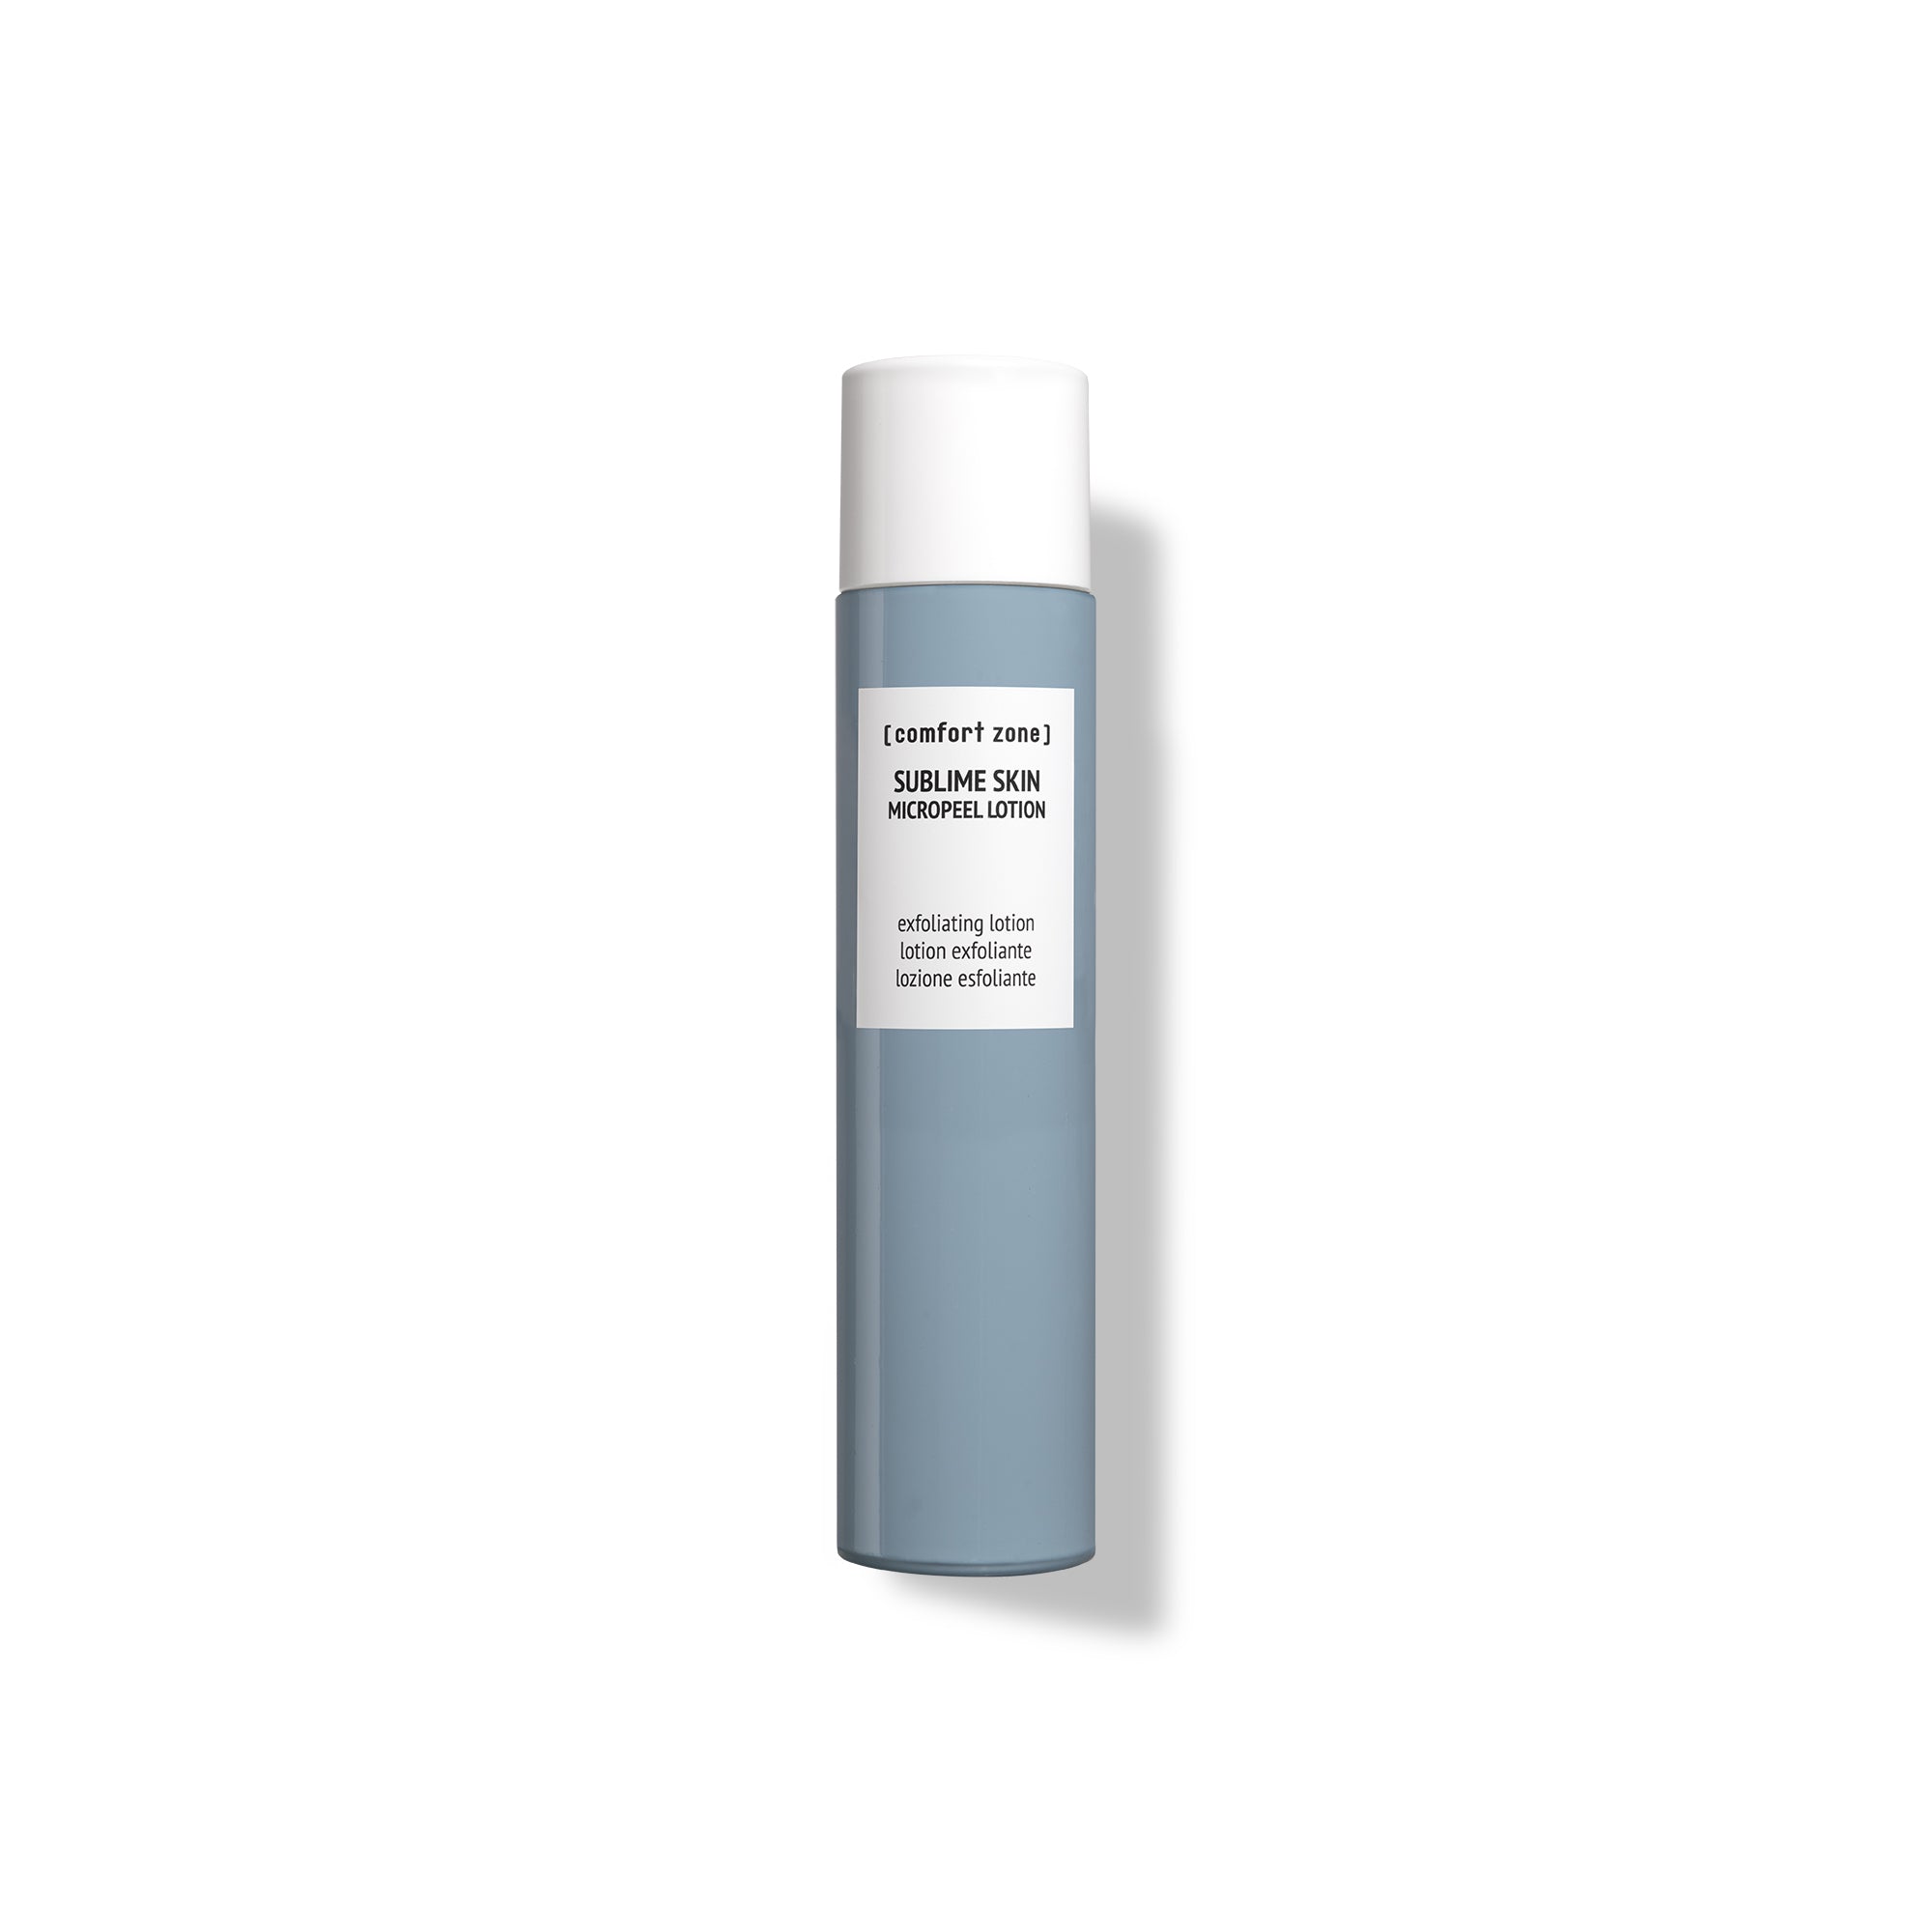 Comfort Zone: SUBLIME SKIN MICROPEEL LOTION Exfoliating lotion-
